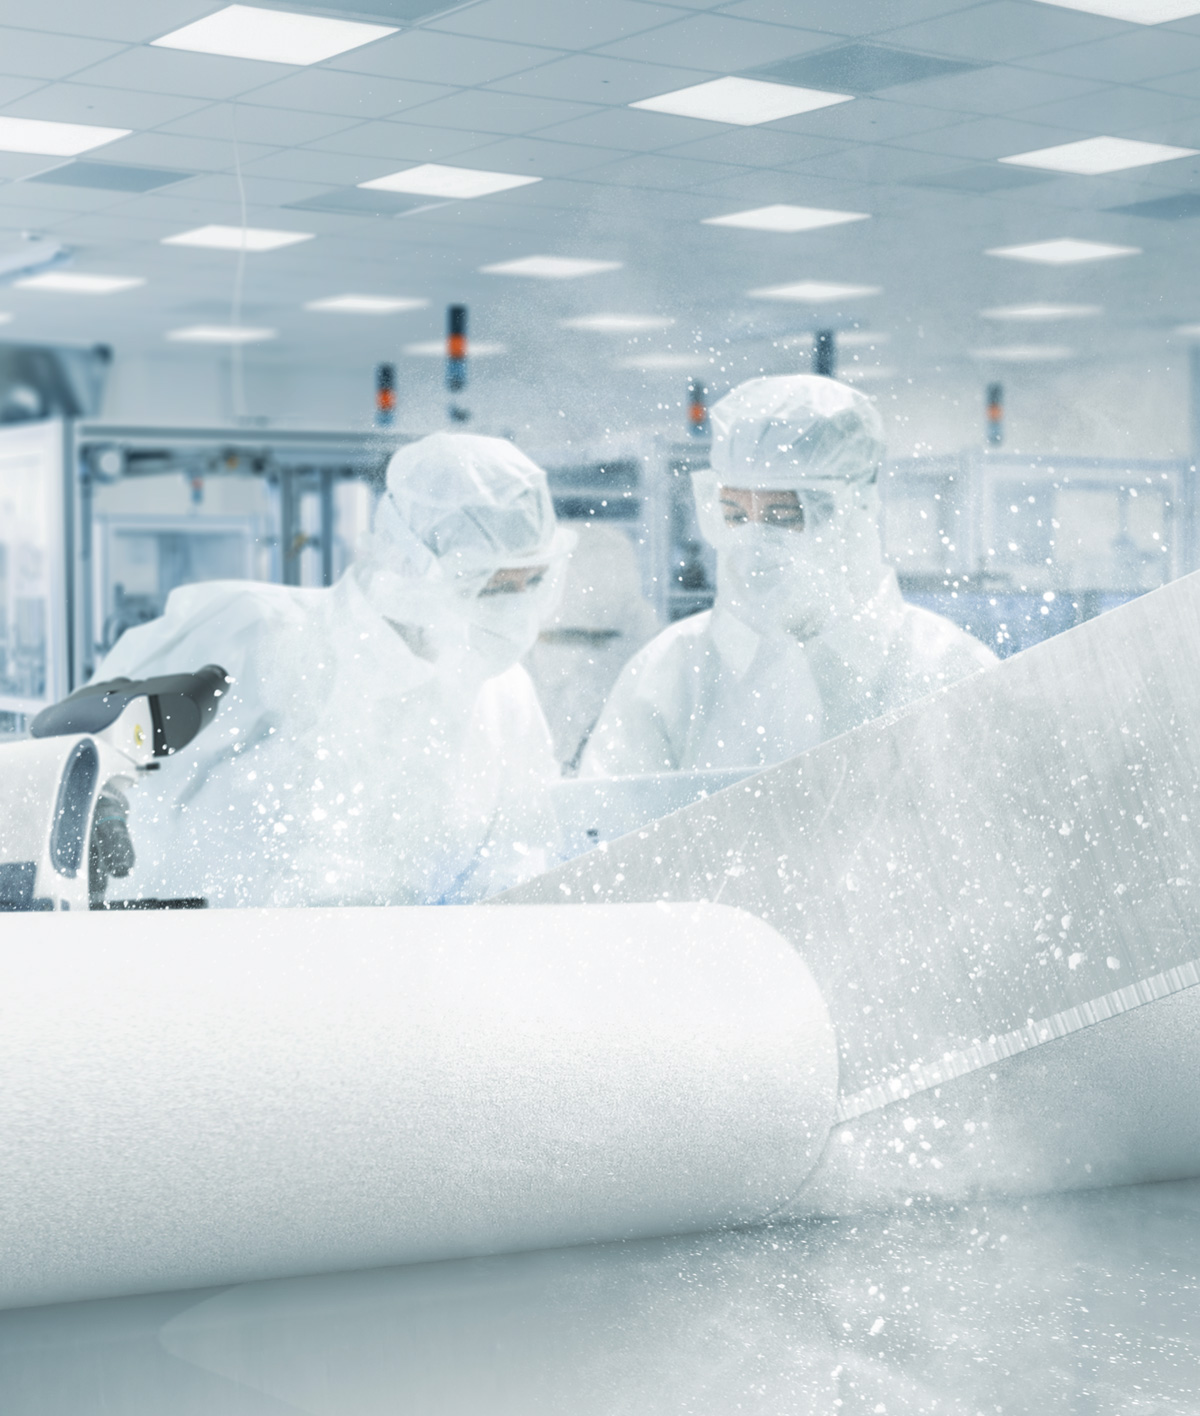 CHOOSE THE RIGHT CLEANROOM INSULATION TO CUT HAZARDOUS PARTICULATE